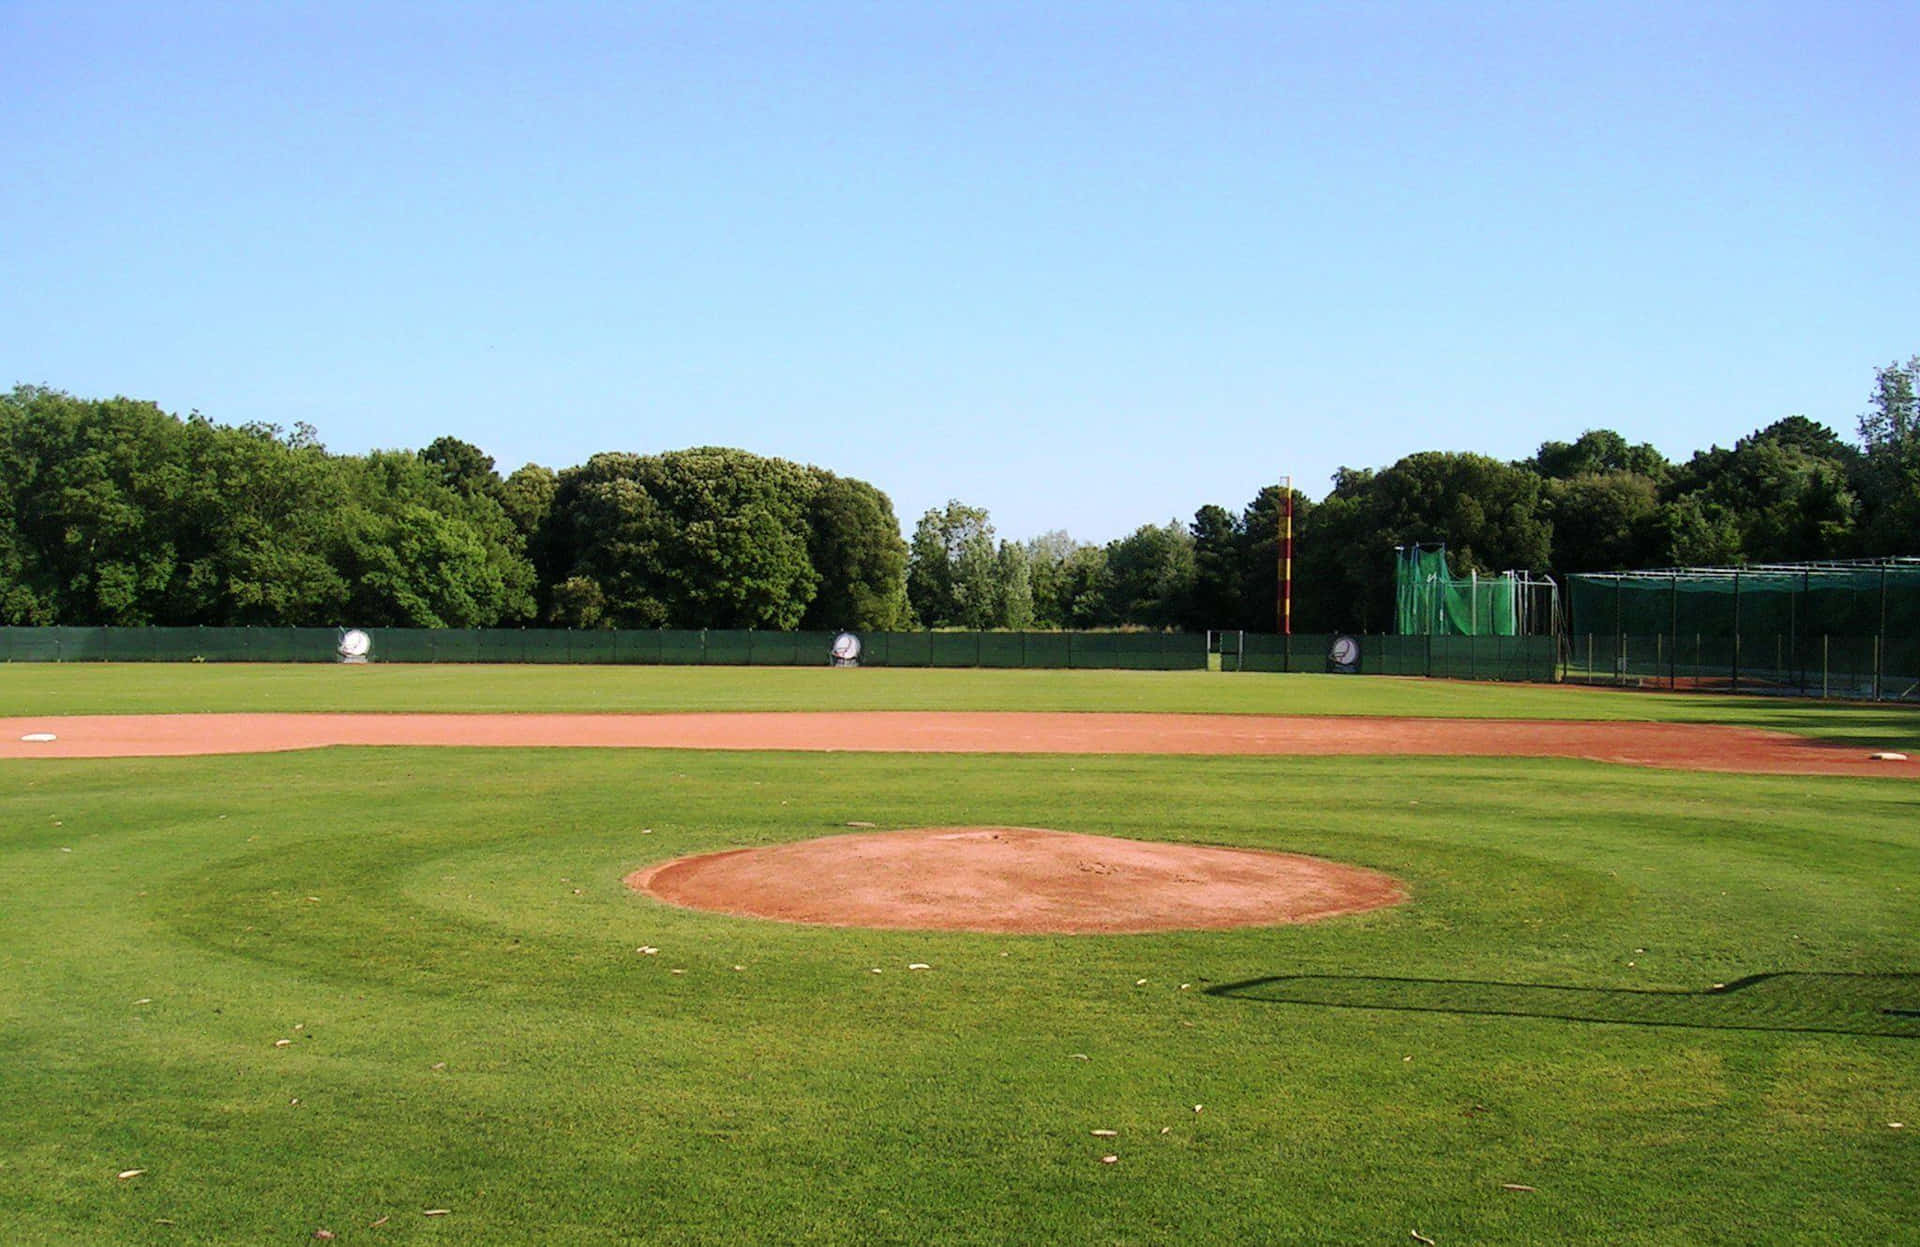 Landscape Baseball Field And Trees Background